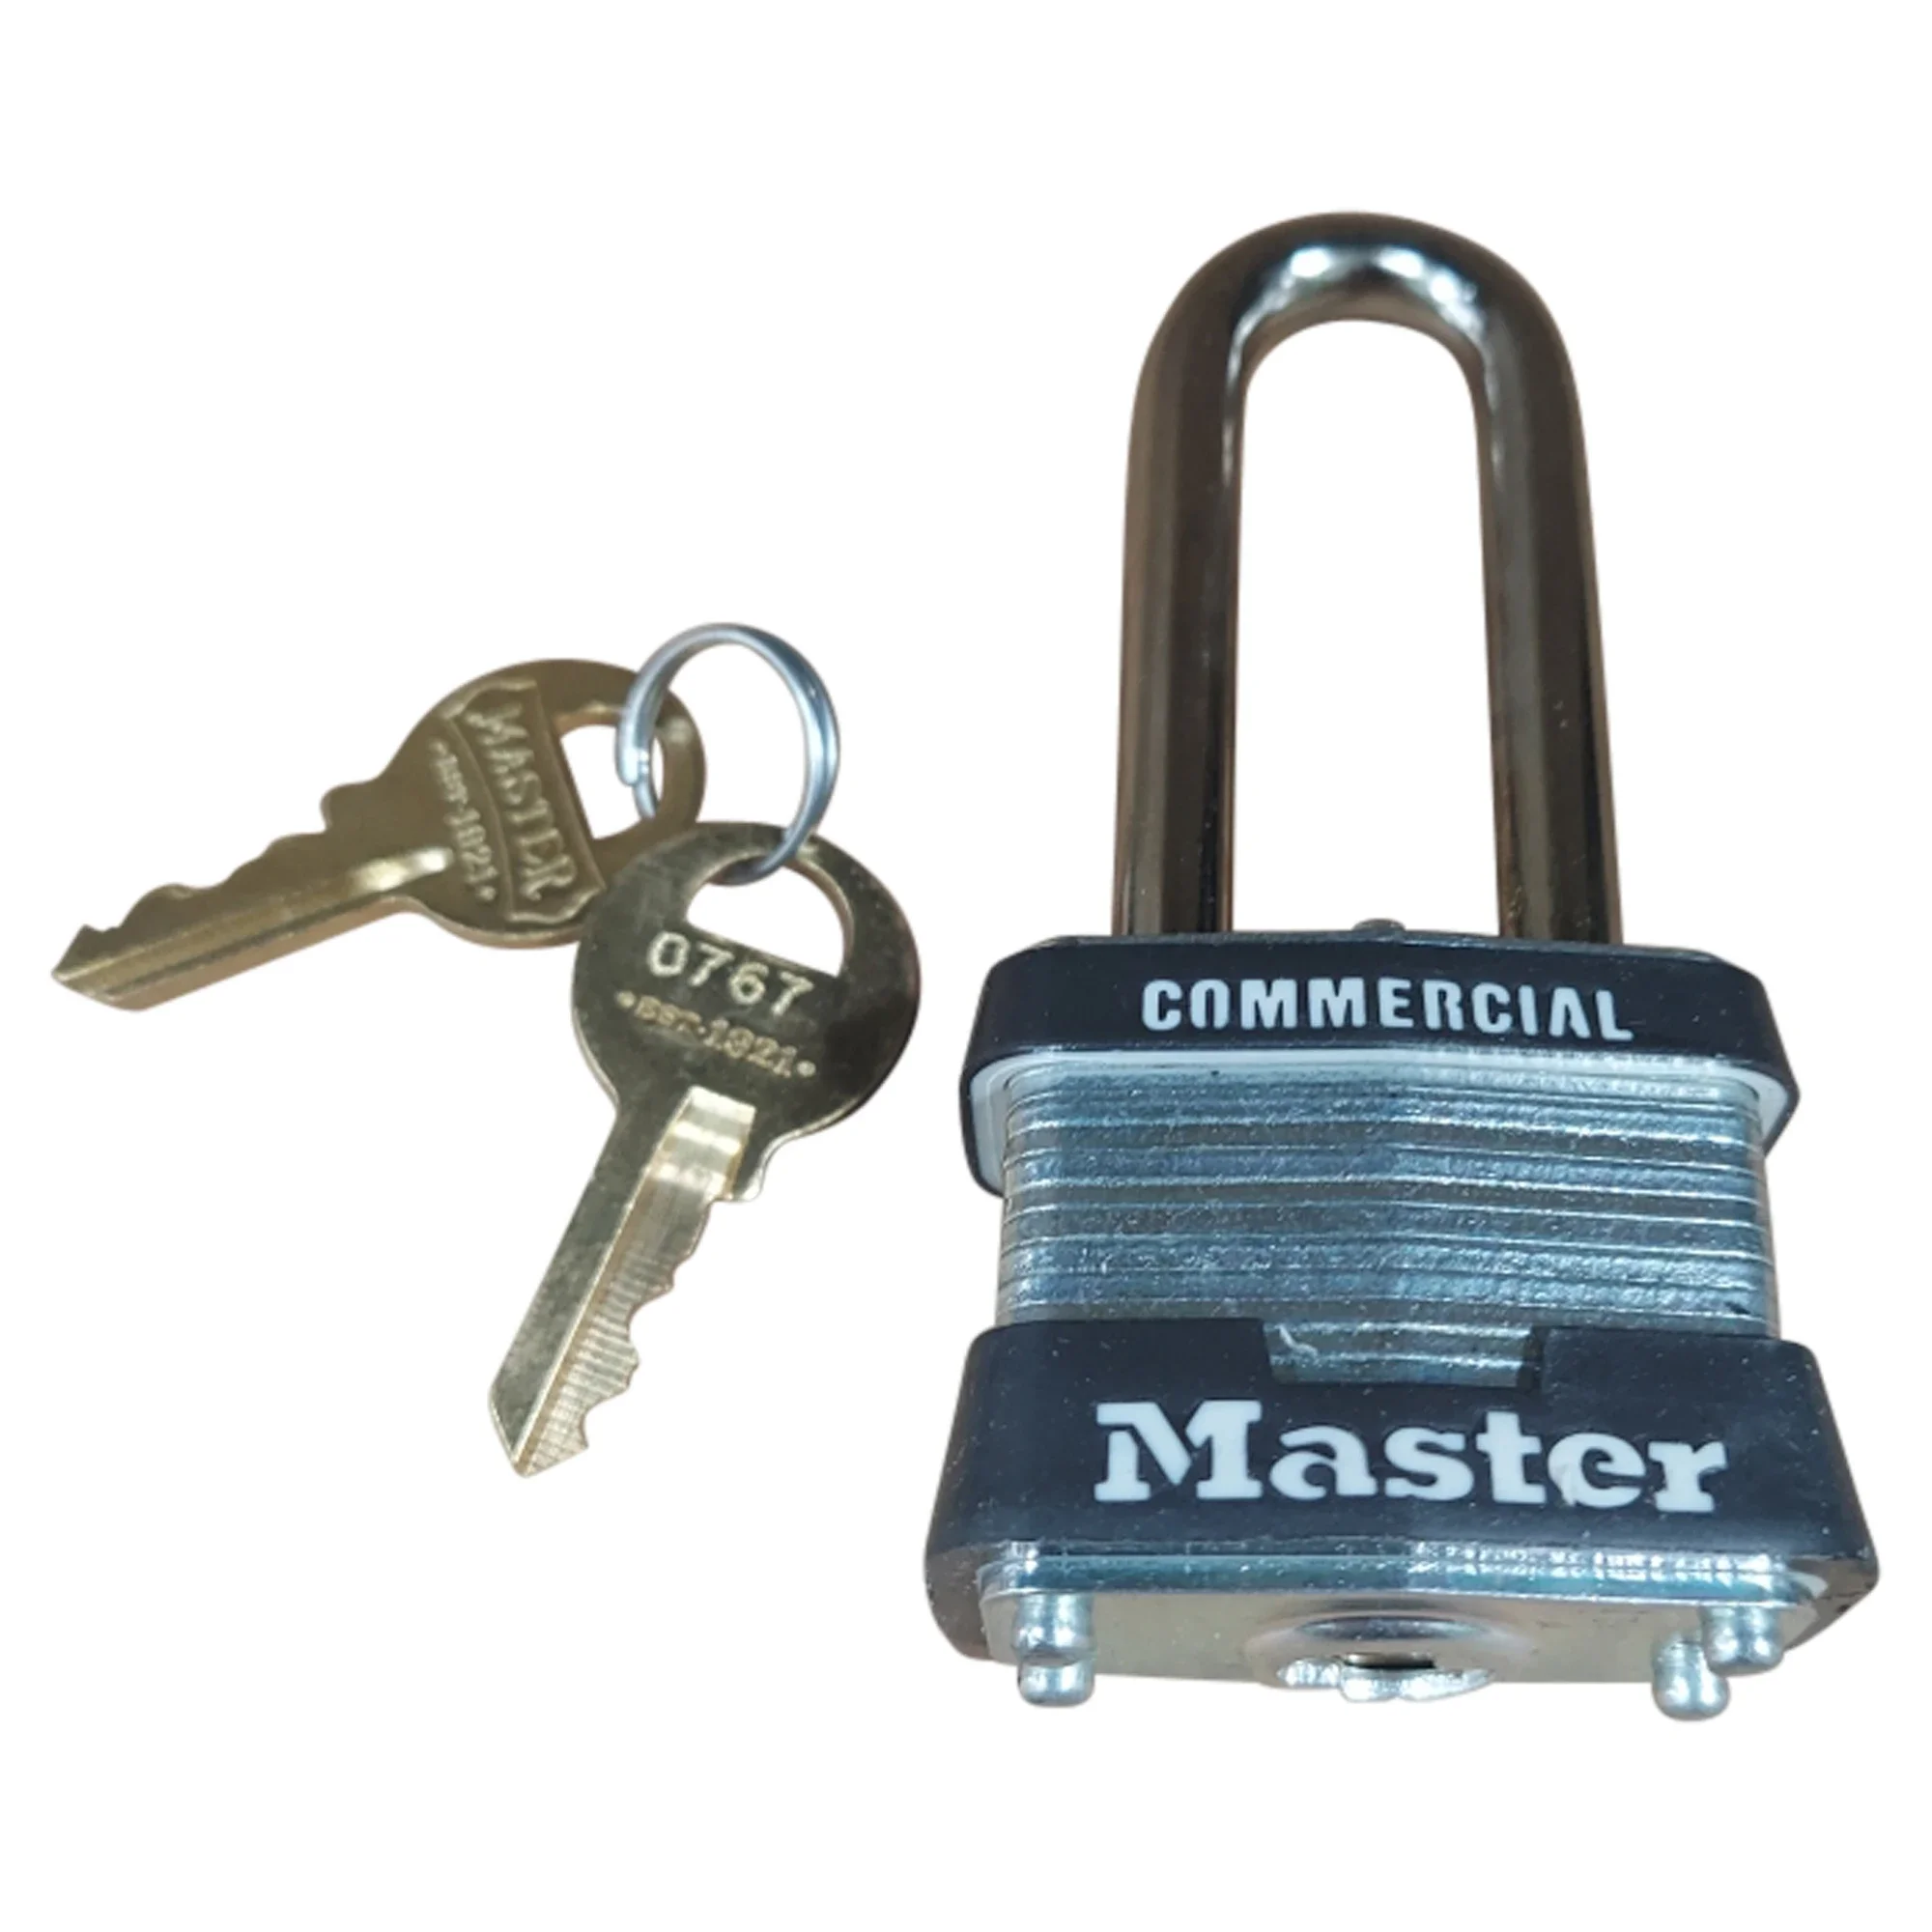 Wastebuilt® Replacement for Master Lock 0767 Keyed